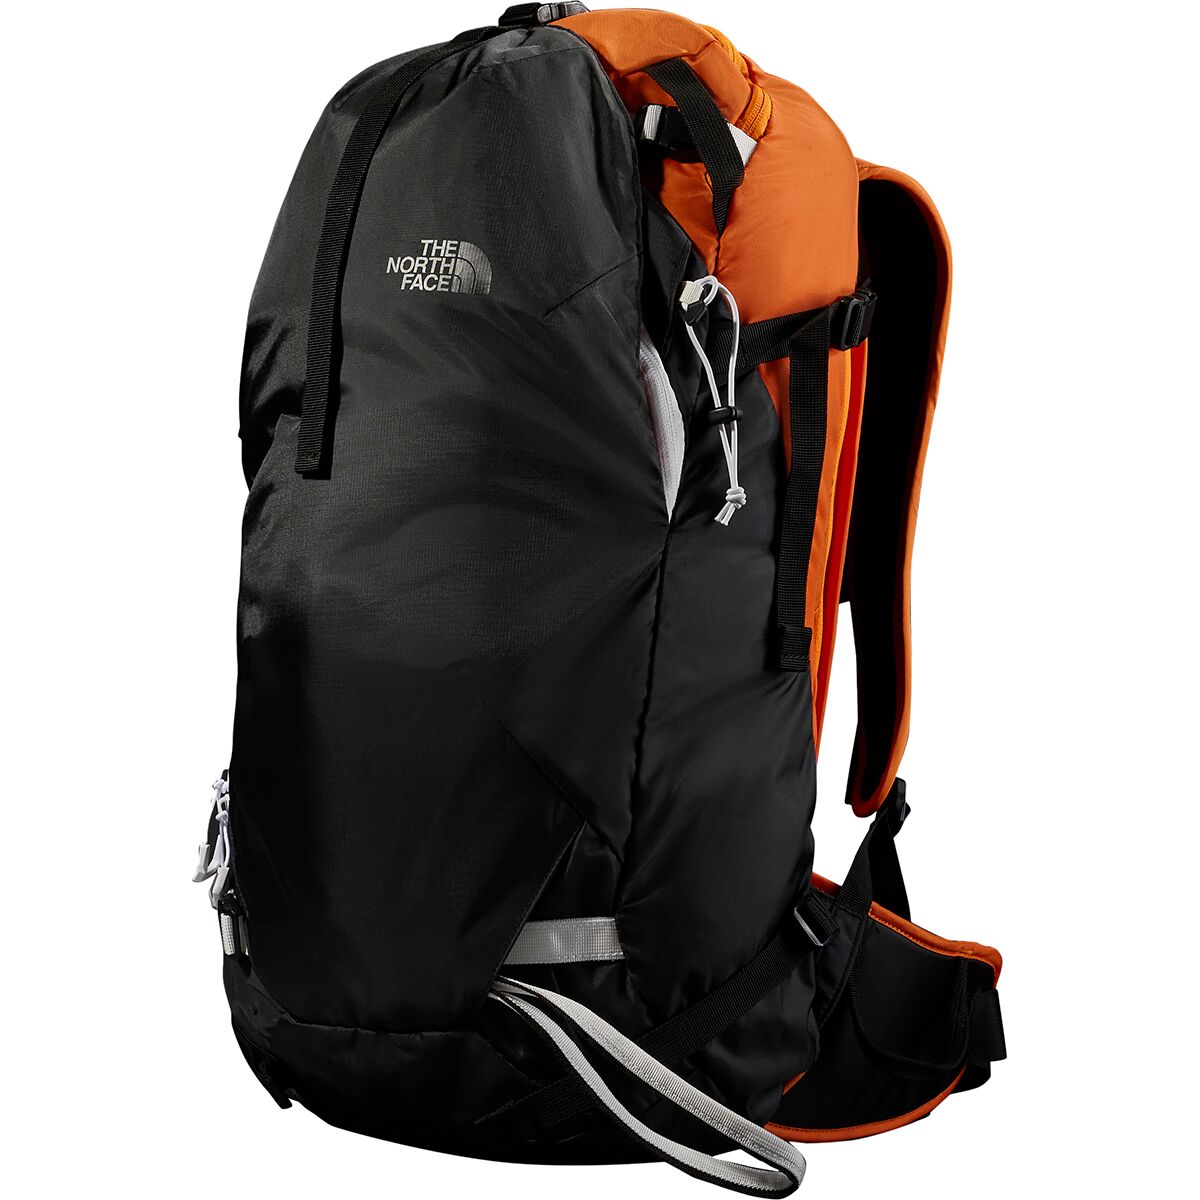 The North Face Snomad 34L Backpack